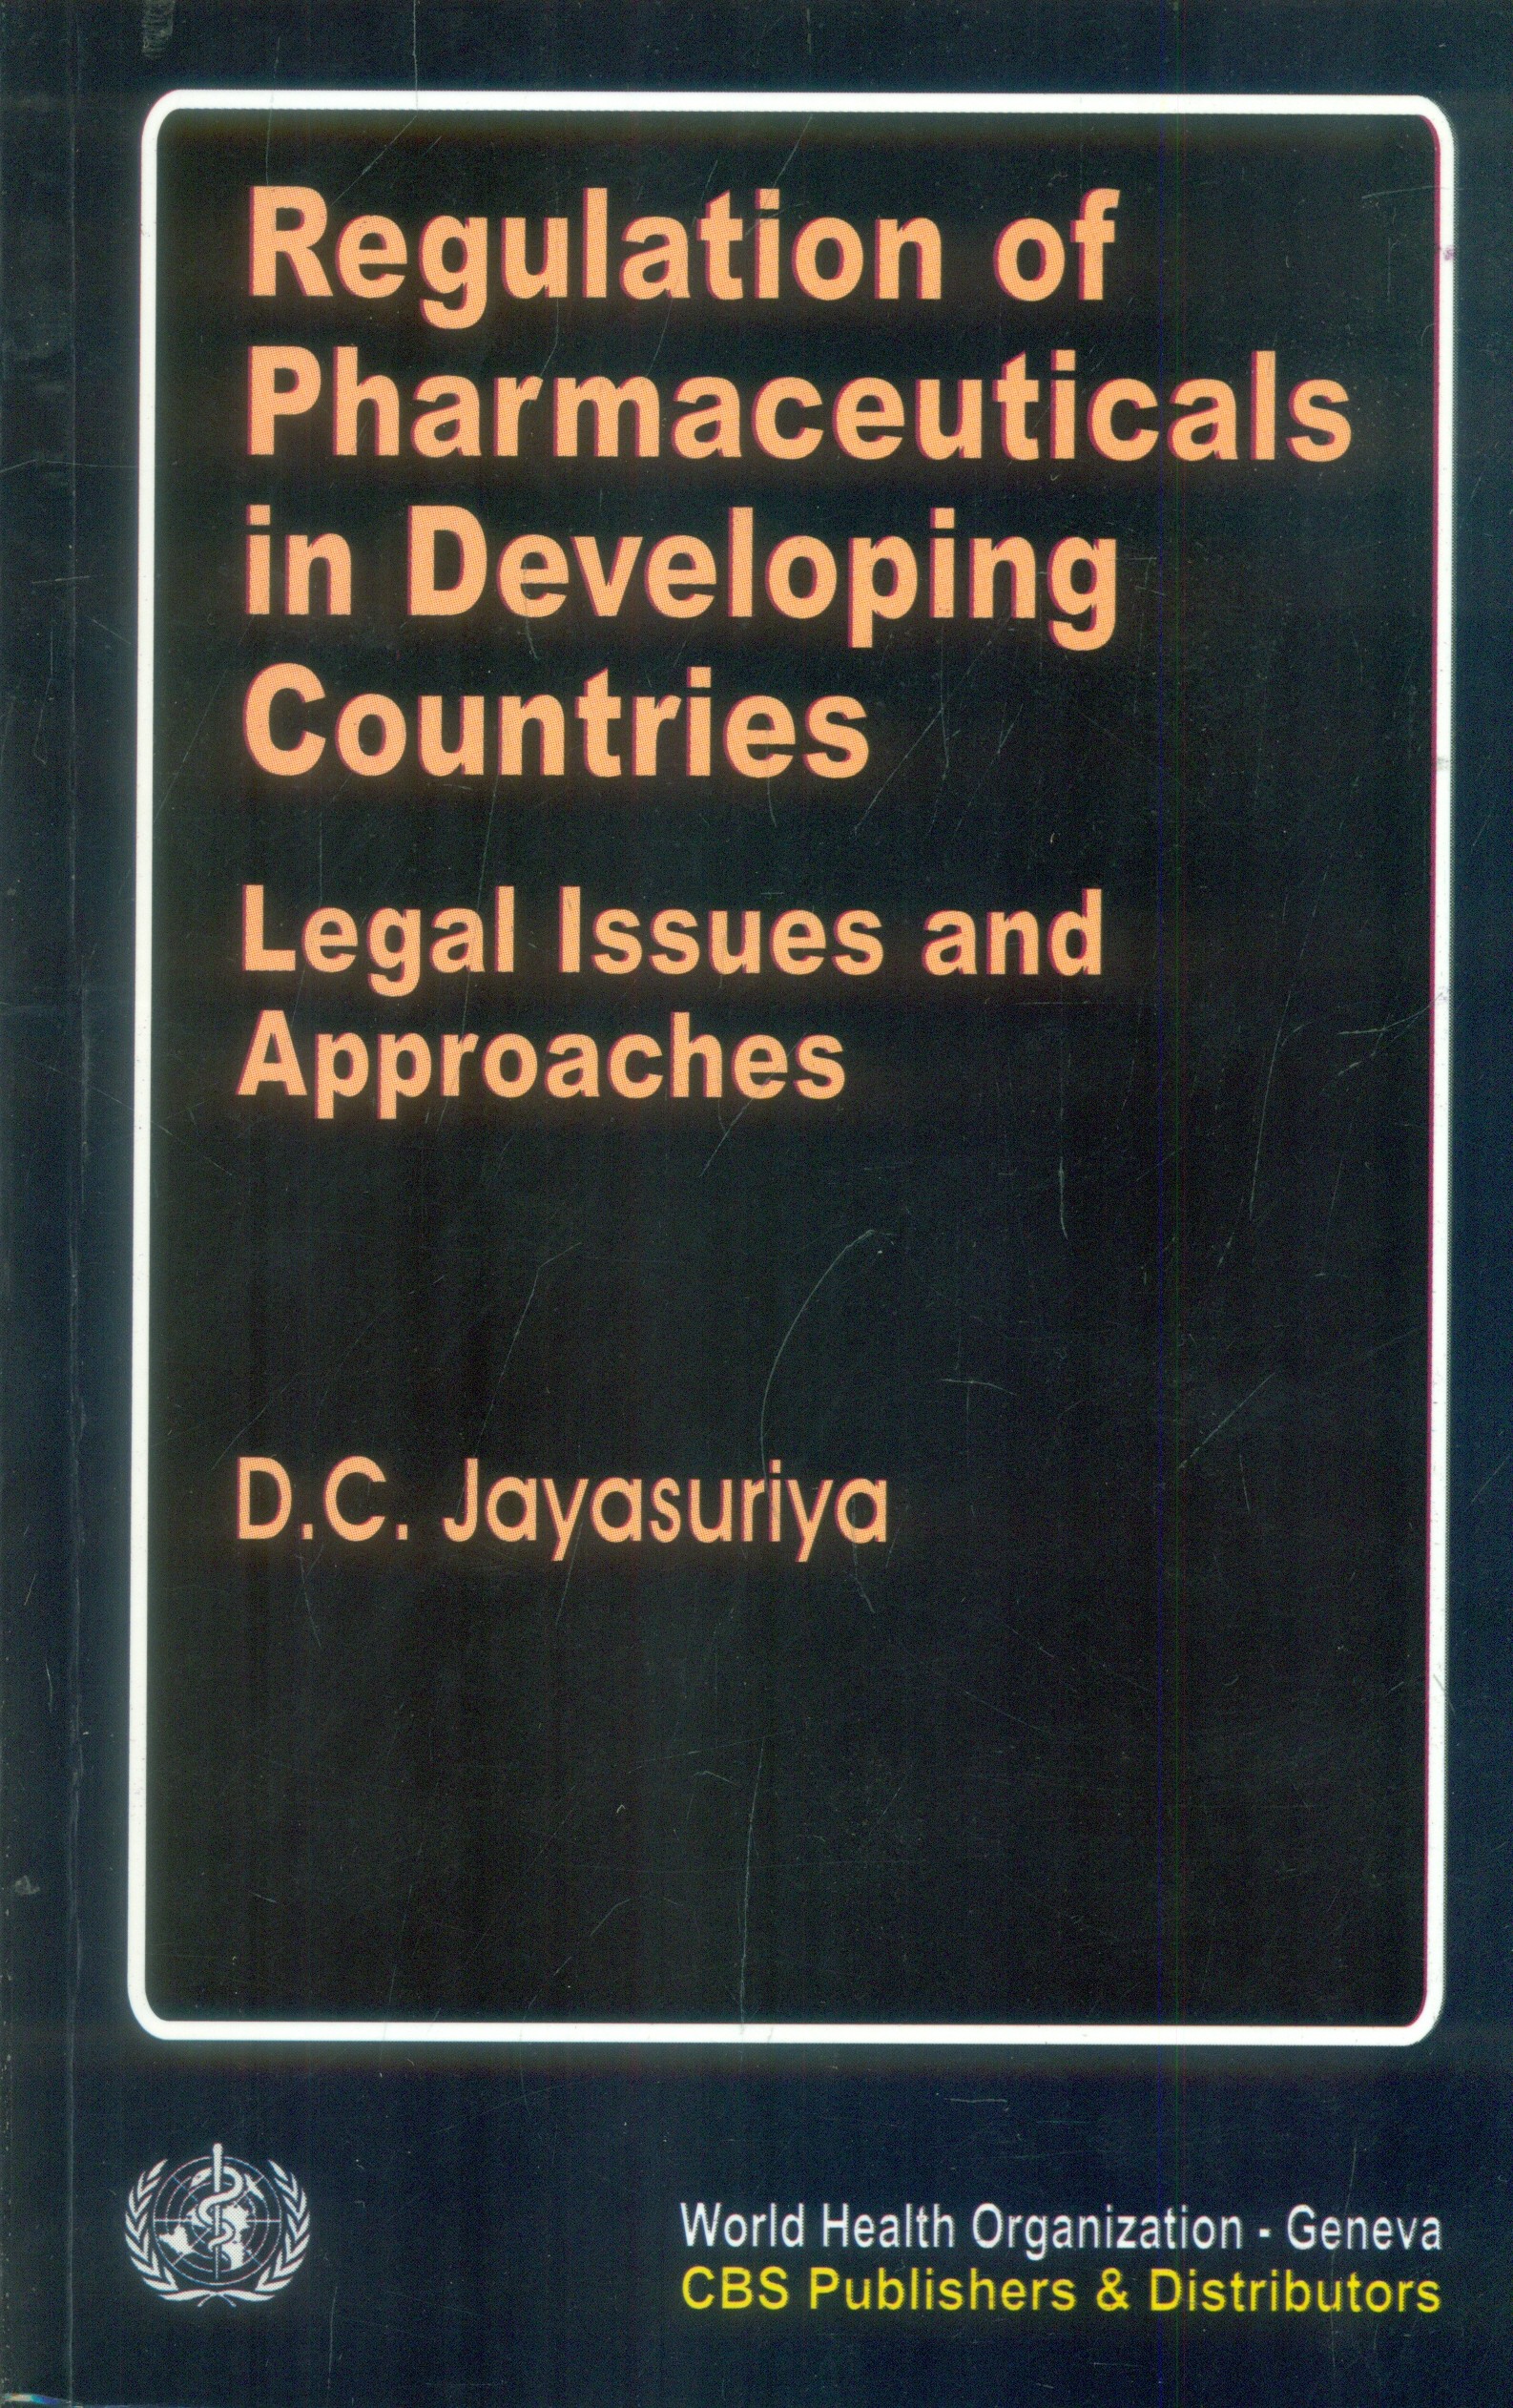 REGULATION OF PHARMACEUTICALS IN DEVELOPING COUNTRIES LEGAL ISSUES AND APPROACHES (PB 1991) 